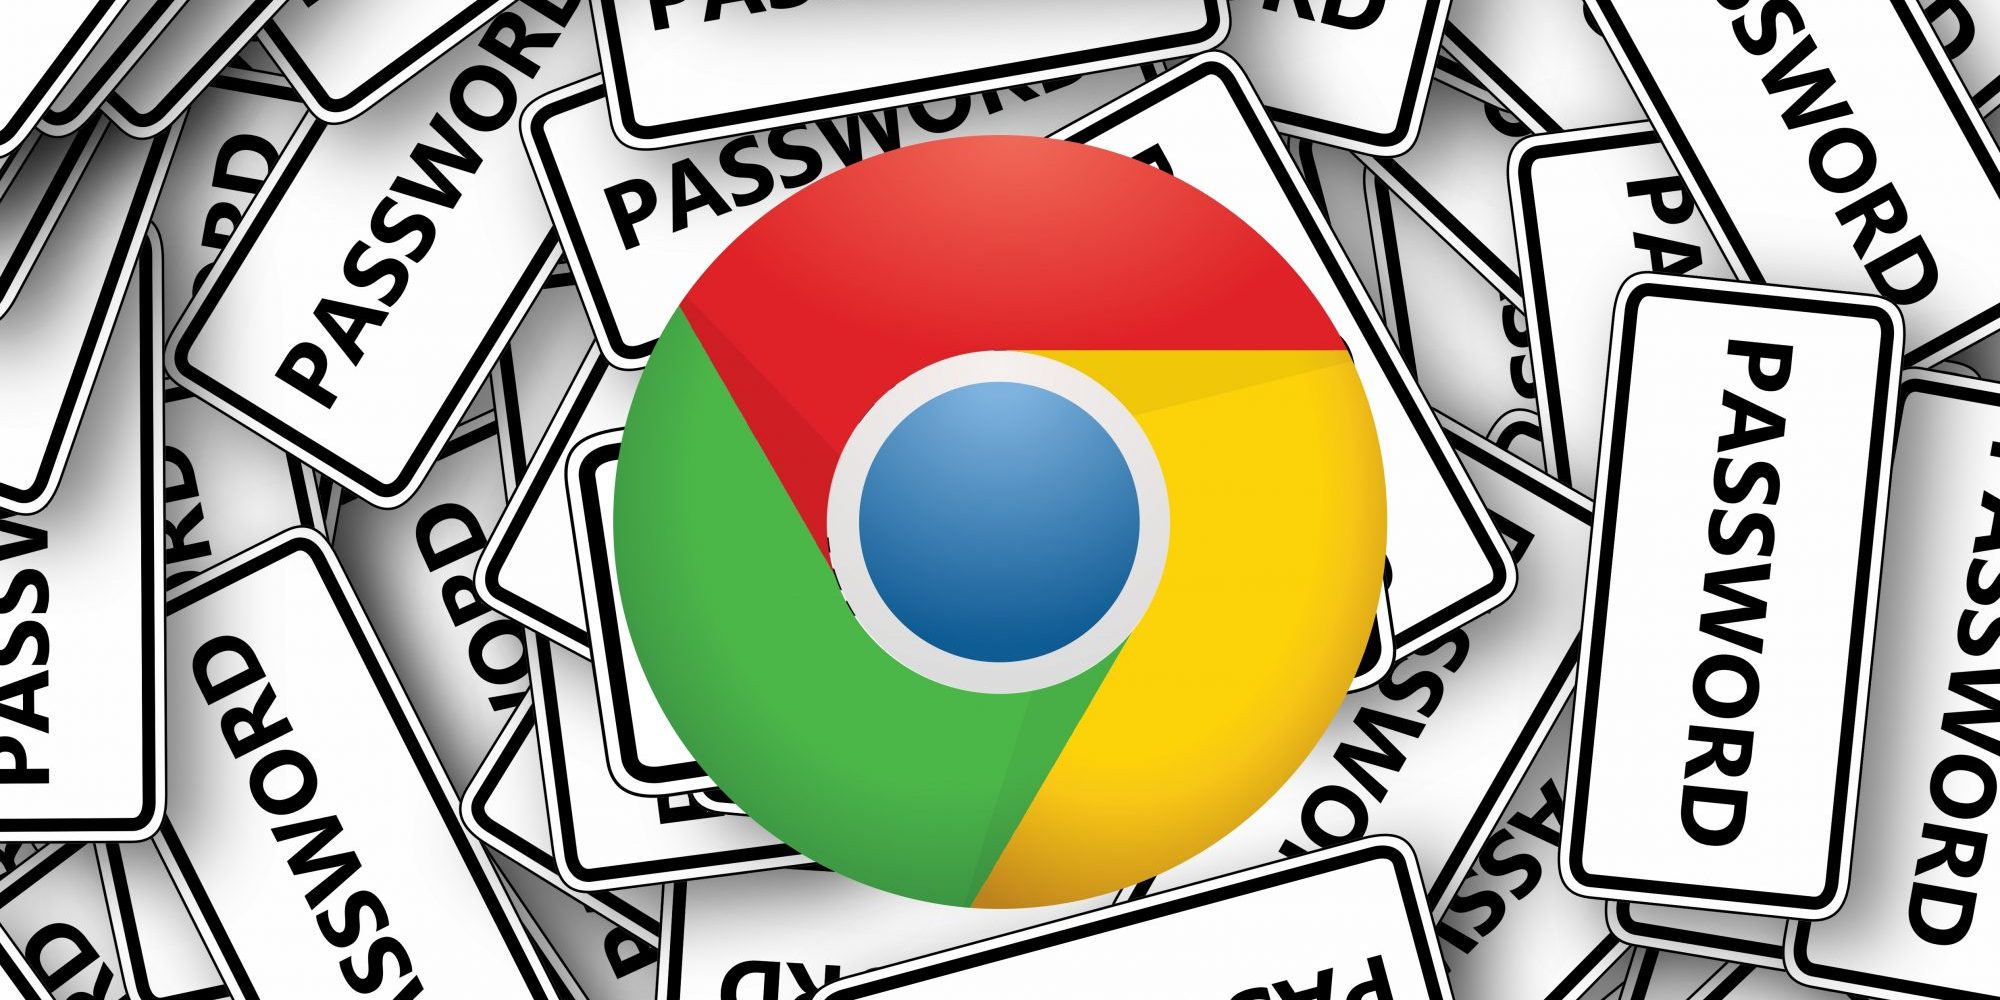 kee password manager chrome